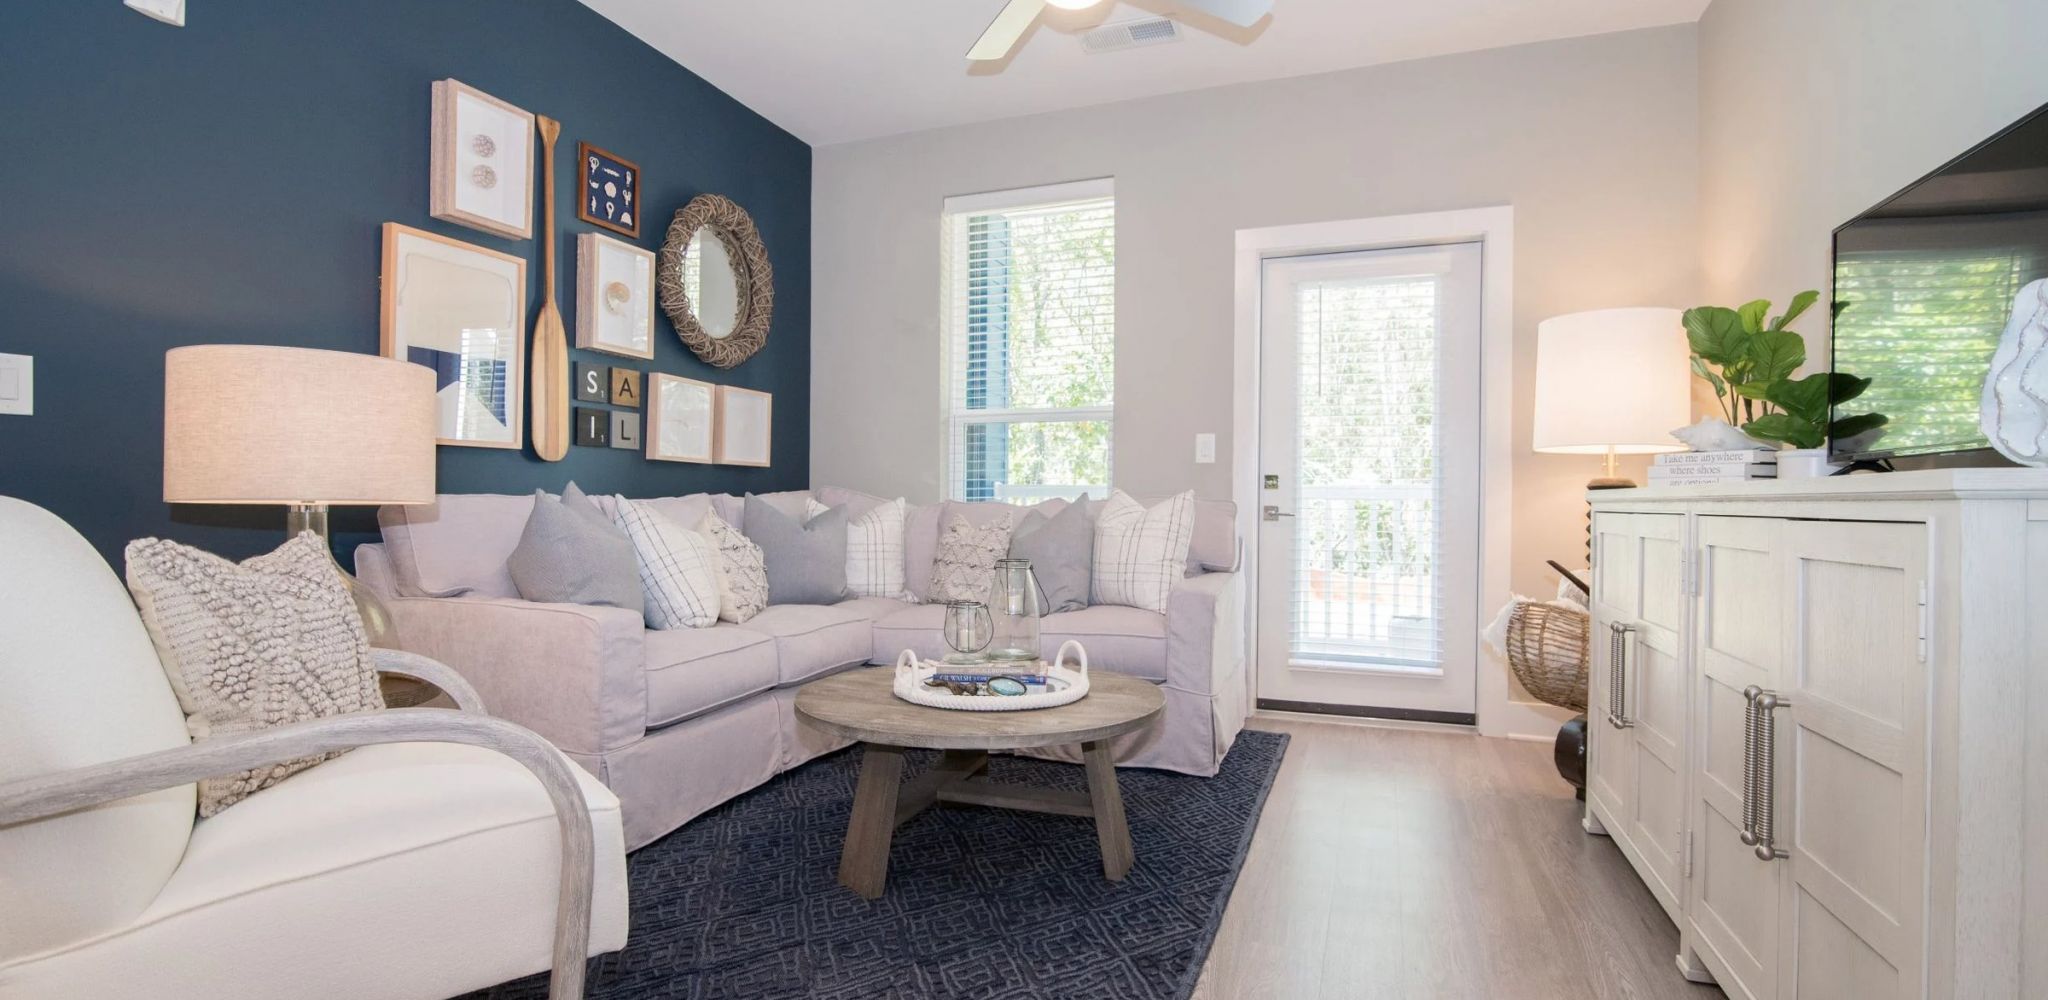 Hawthorne at Indy West apartment living room with ceiling fan, hardwood floors, and a blue accent wall